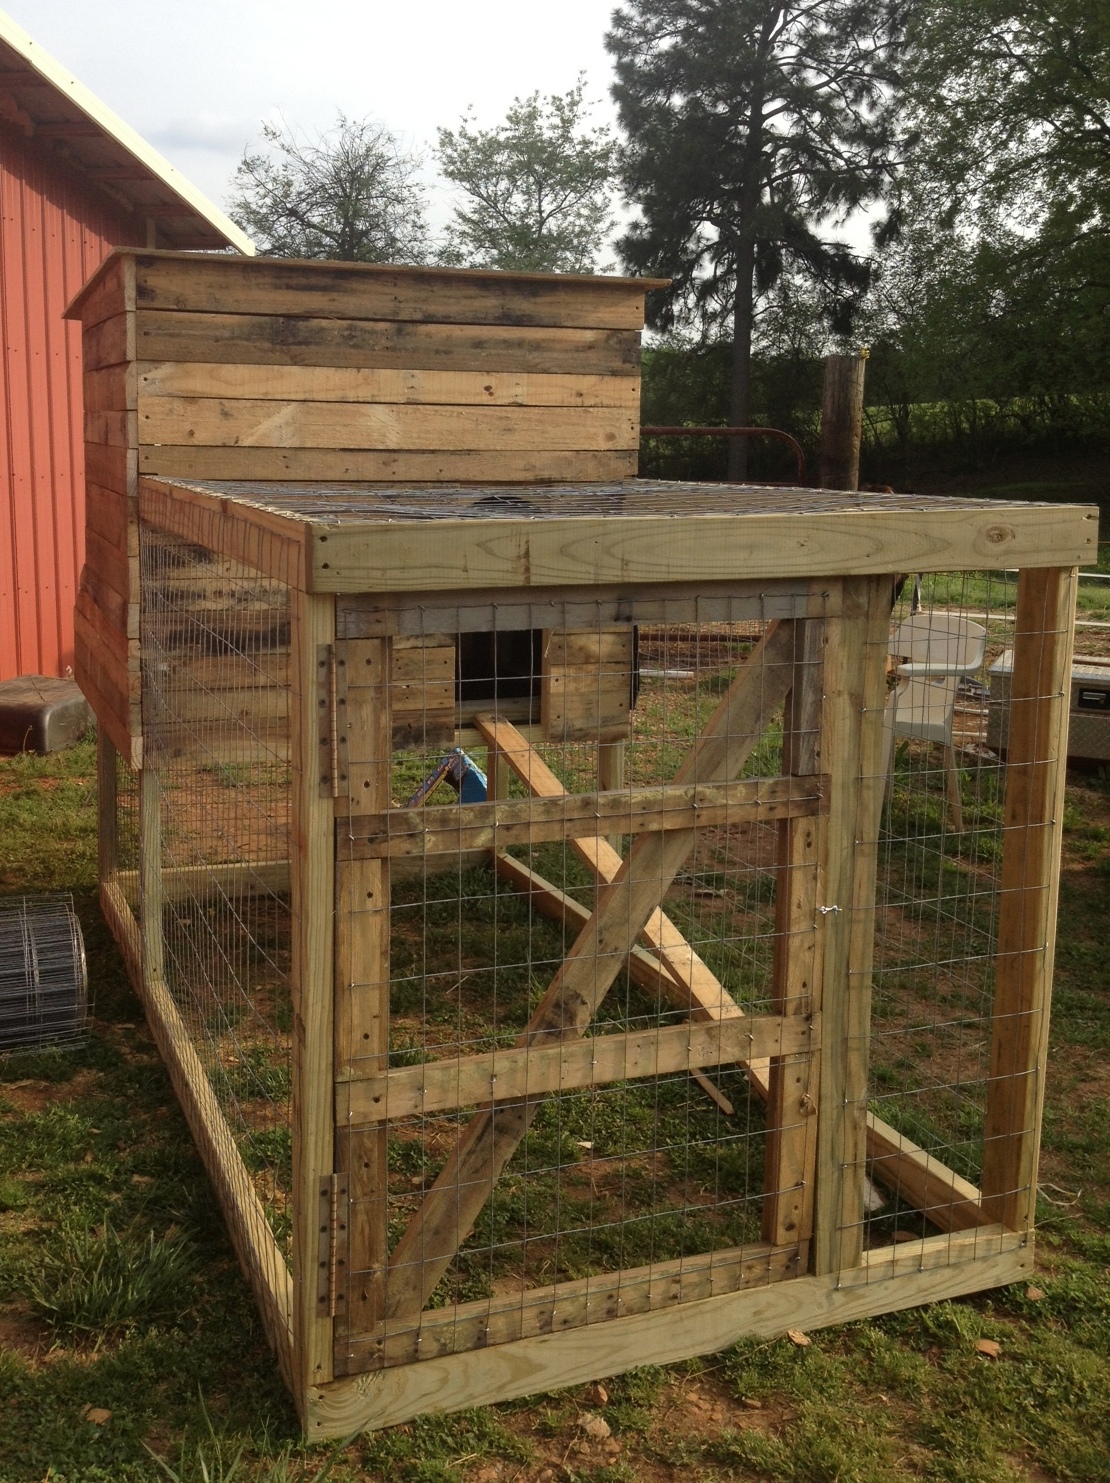  think the pallets give the chicken coop a rustic country feel